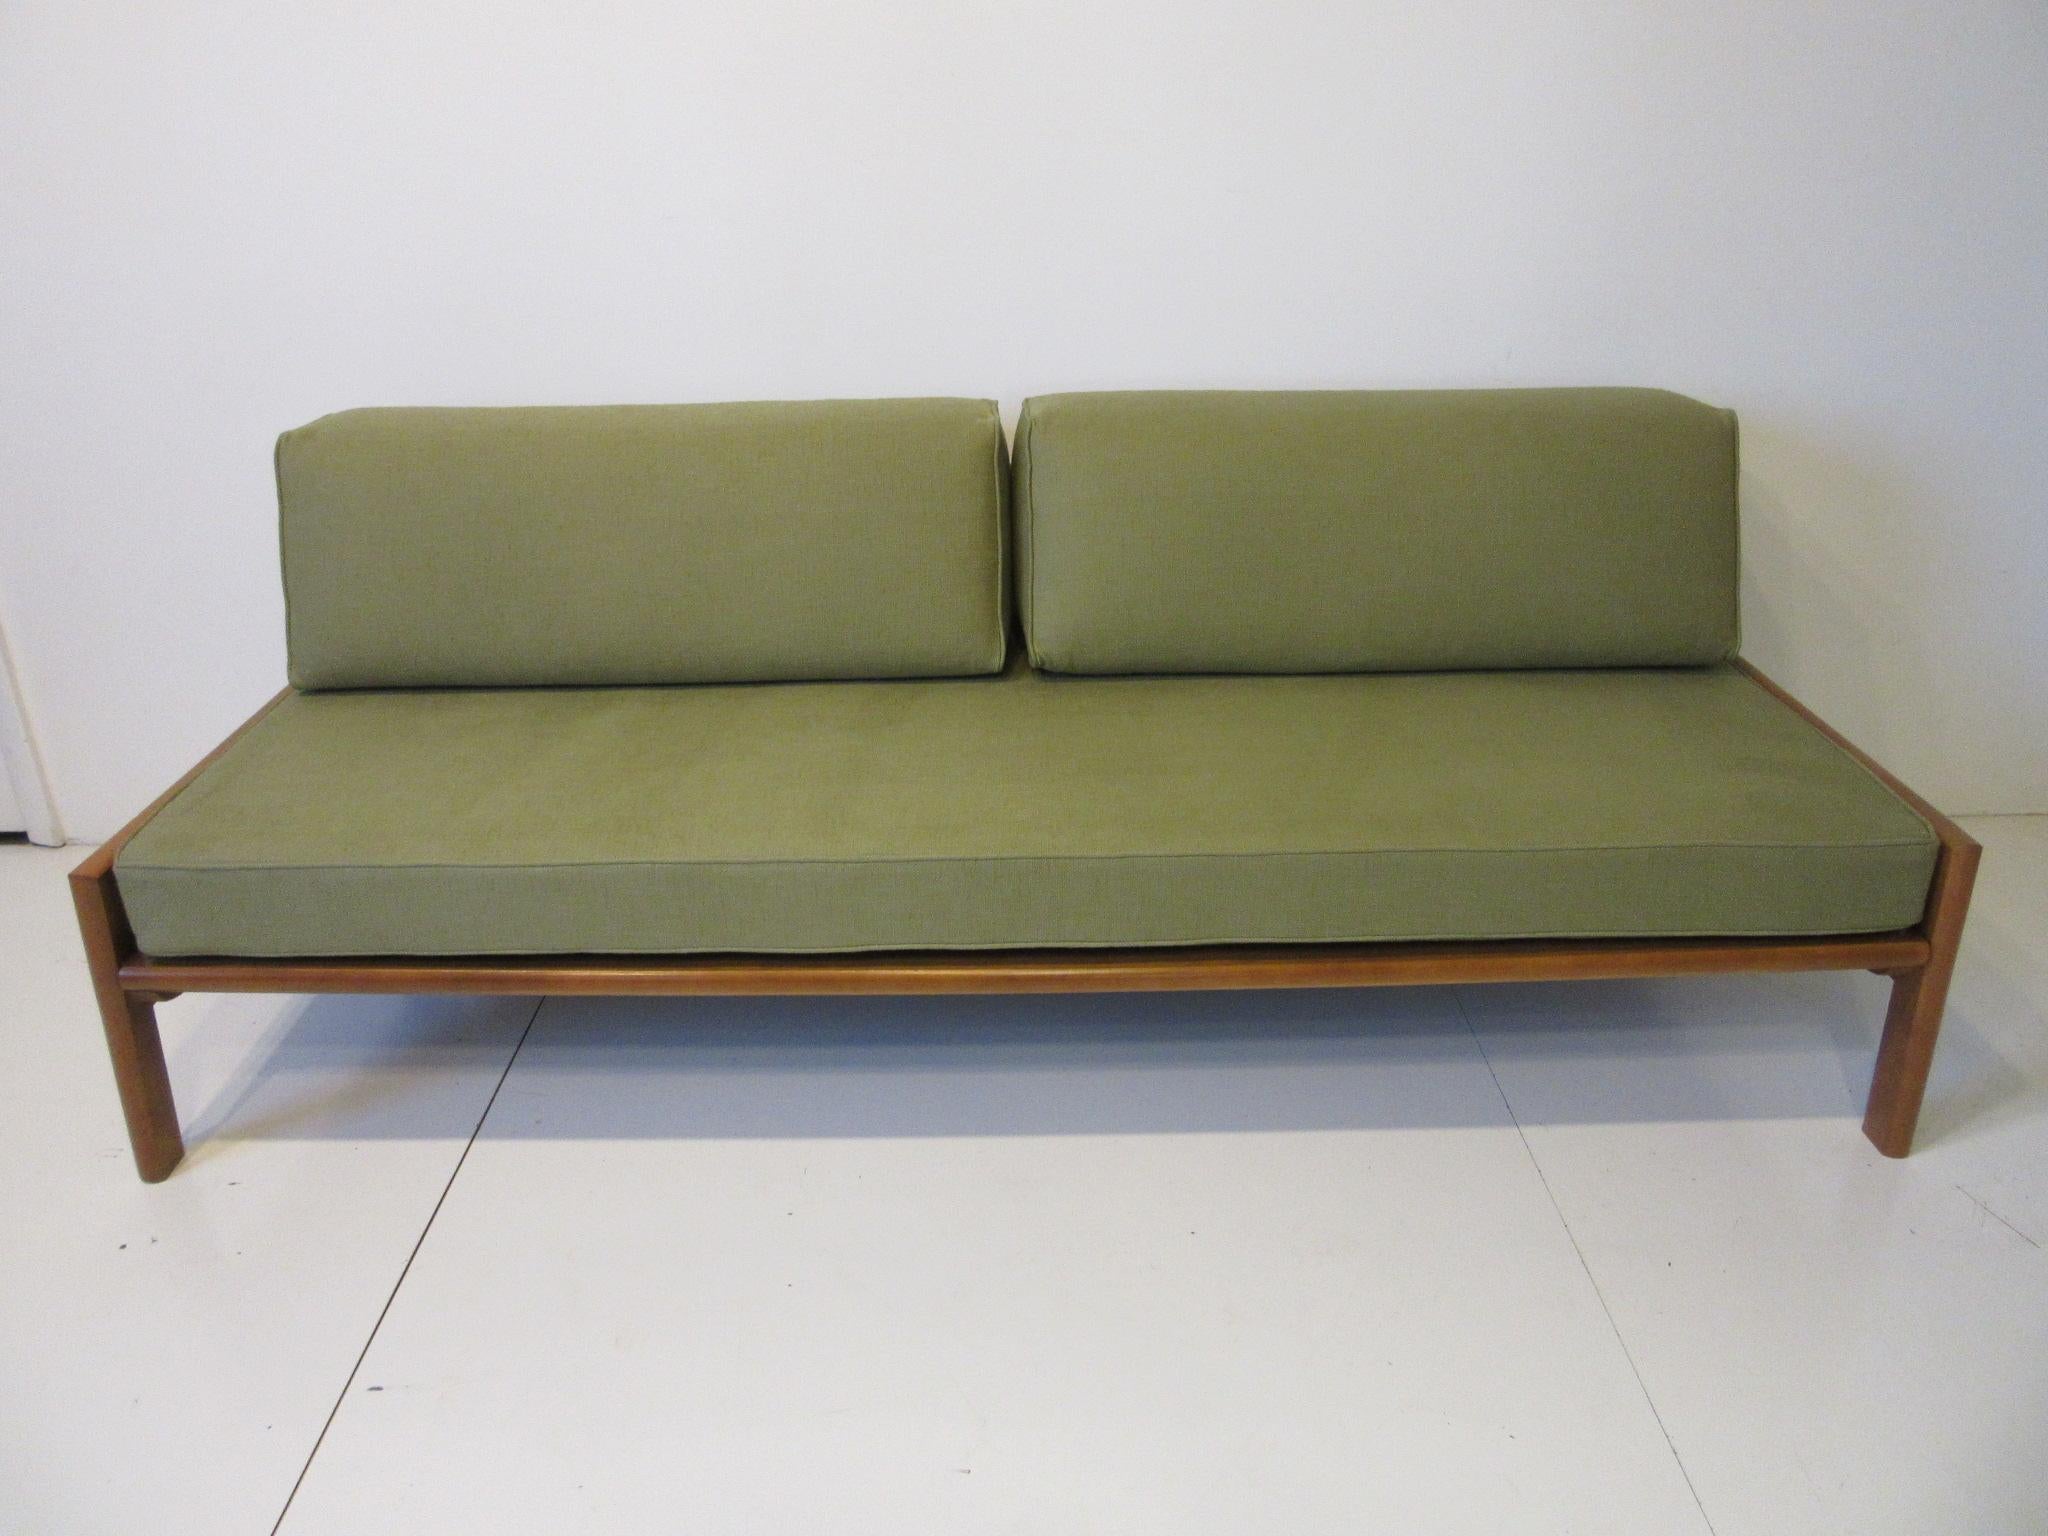 Upholstery Midcentury Daybed / Sofa in the Style of Van Keppel Green